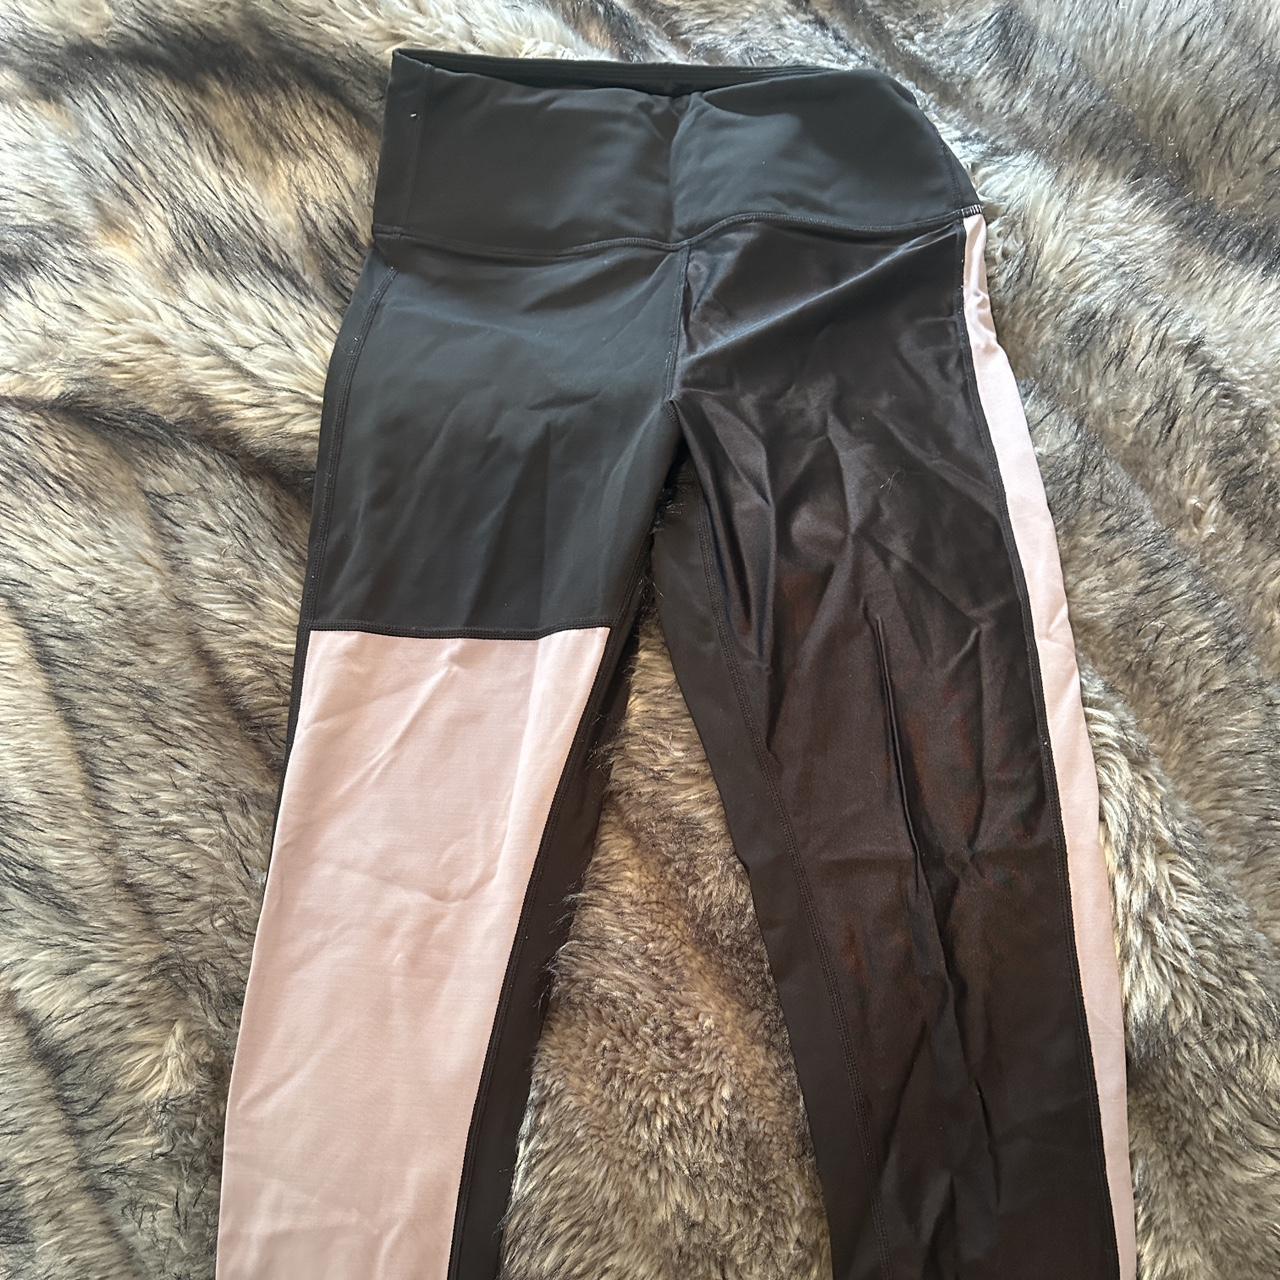 ALALA patchwork leggings. Worn once. Size small. - Depop